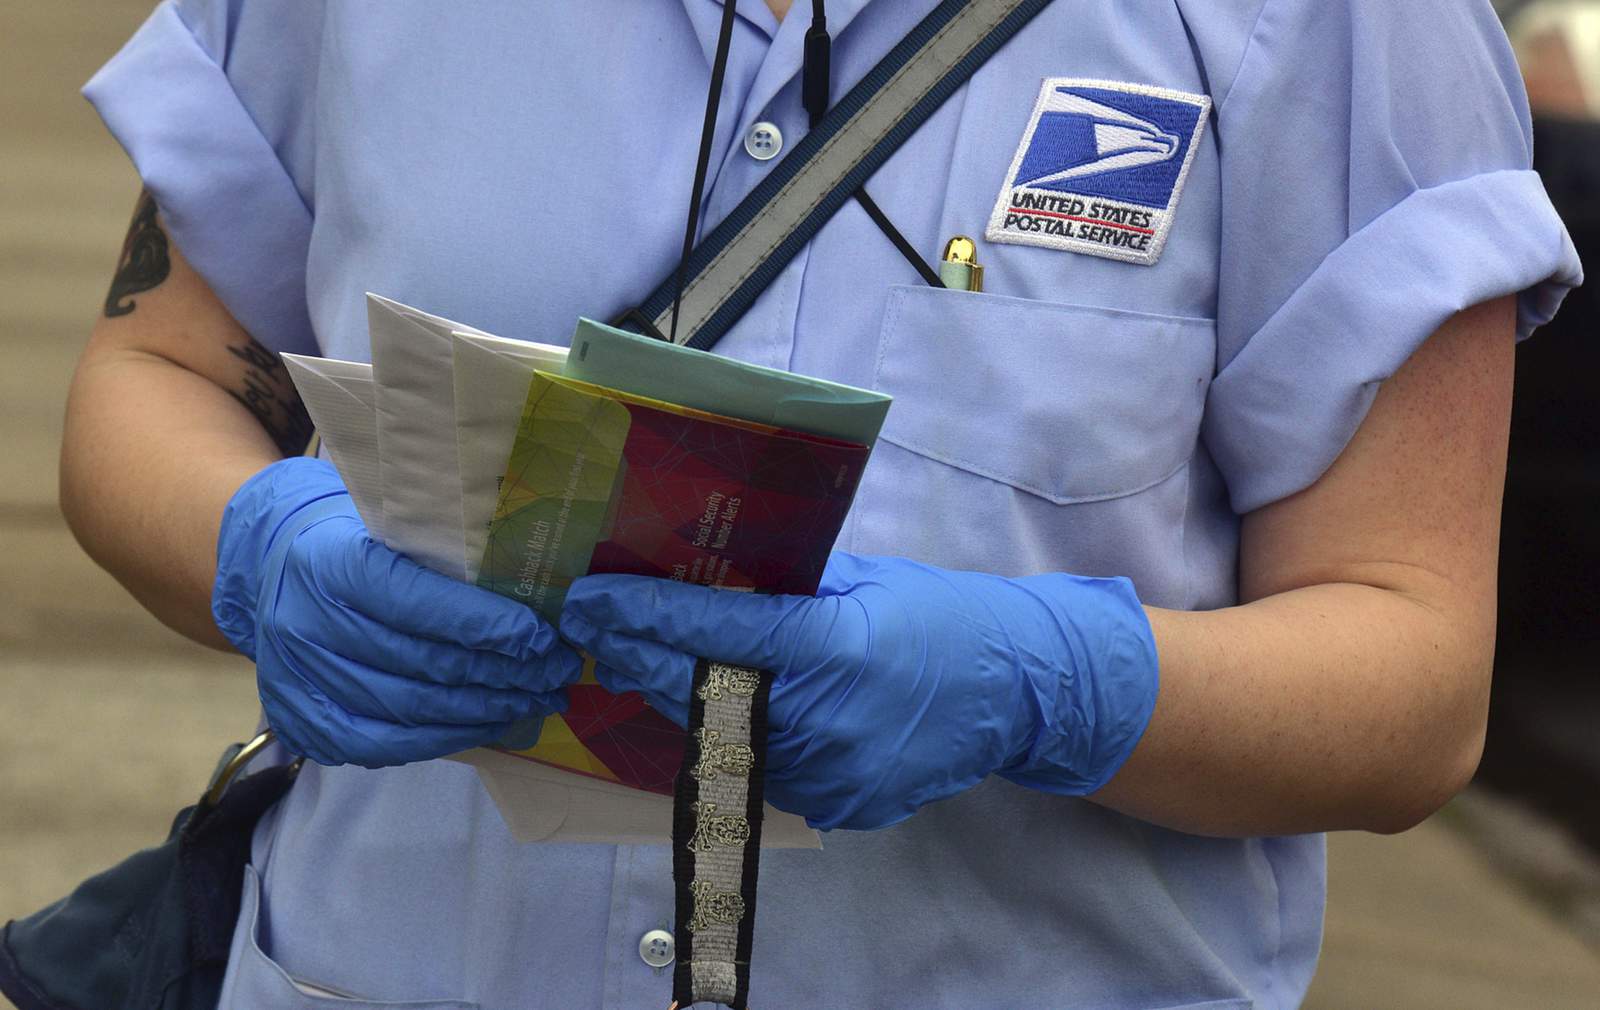 Postal carrier guilty of stealing gift cards, other mail